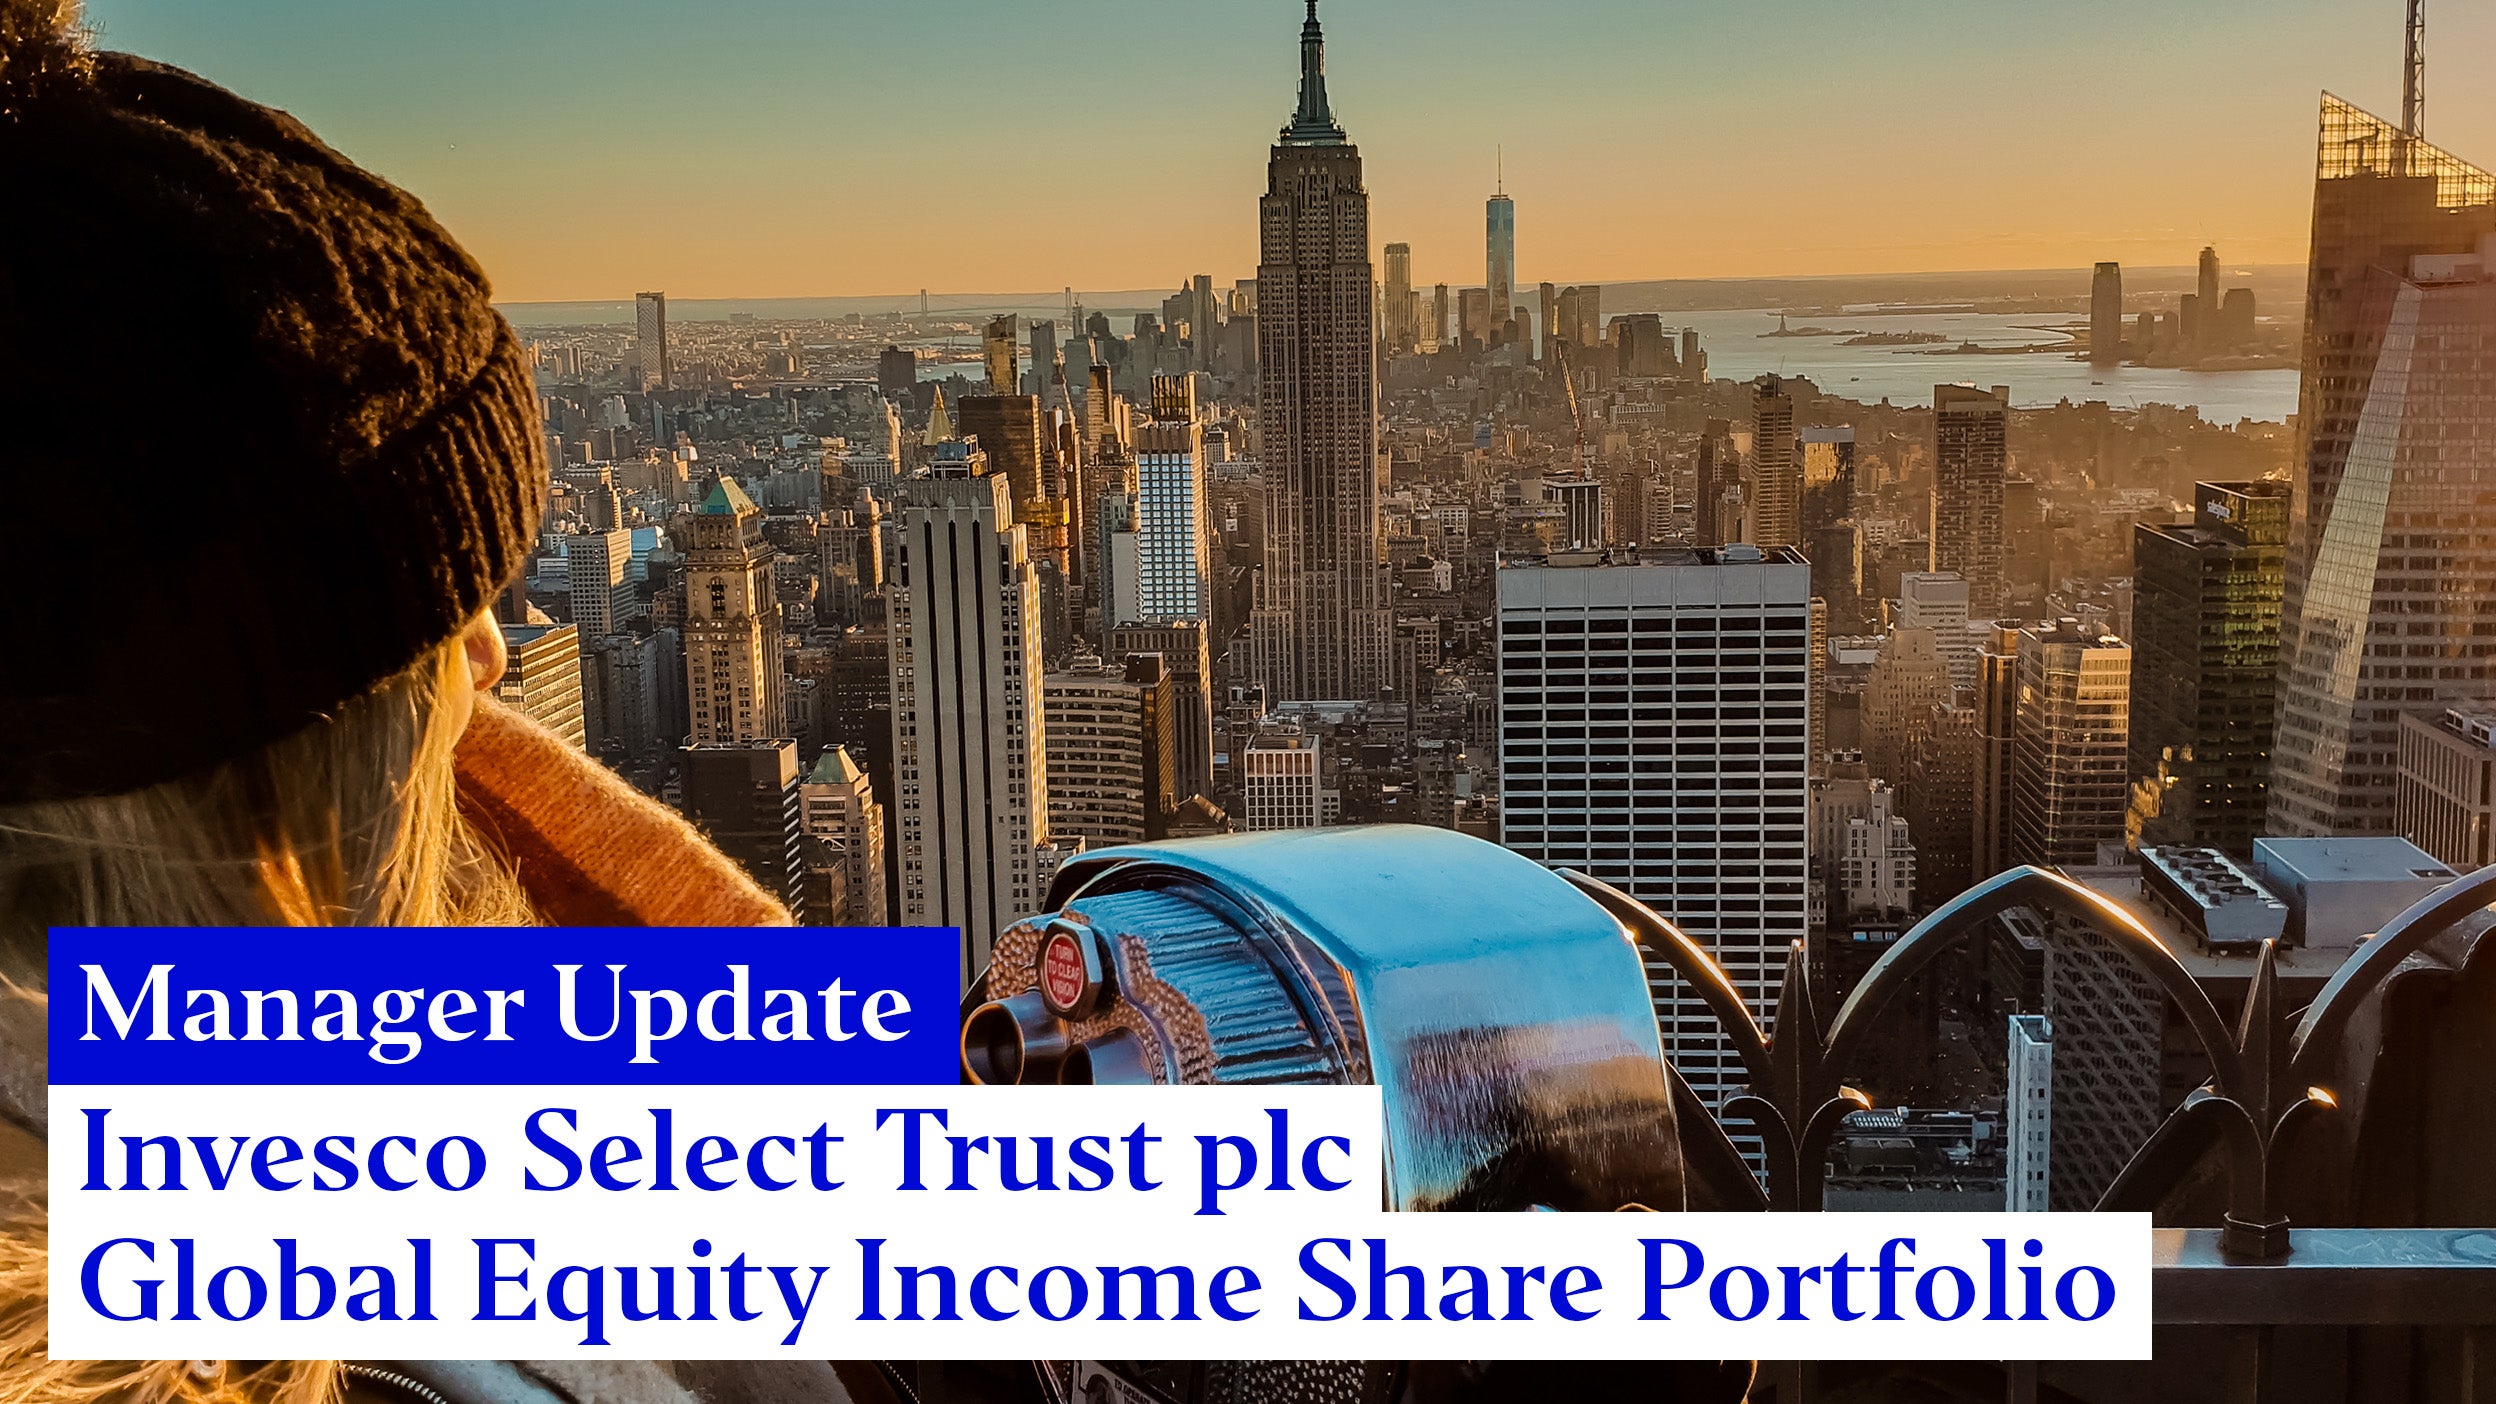 Invesco Select Trust plc - Global Equity Income Share Portfolio: Manager update